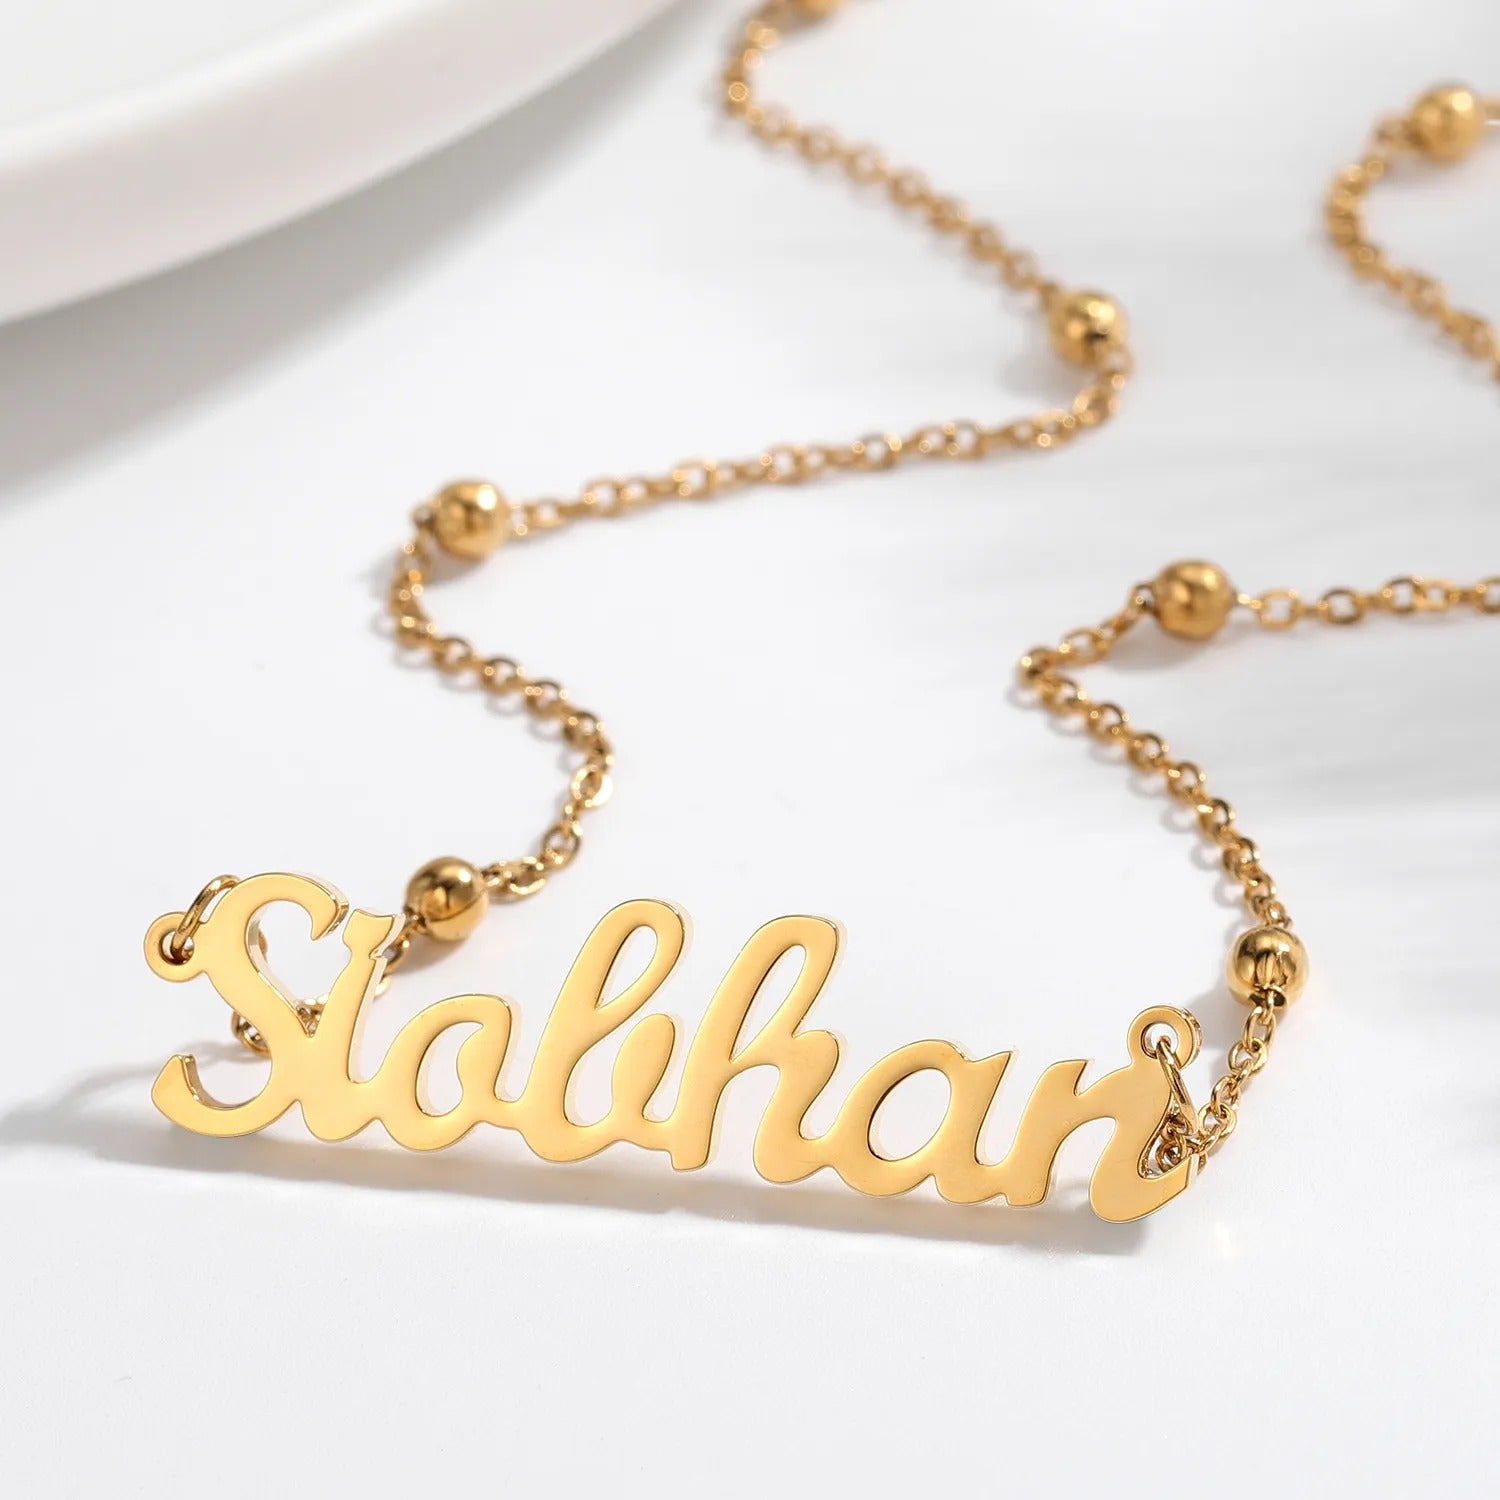 Personalised Name Necklace with Beaded Chain